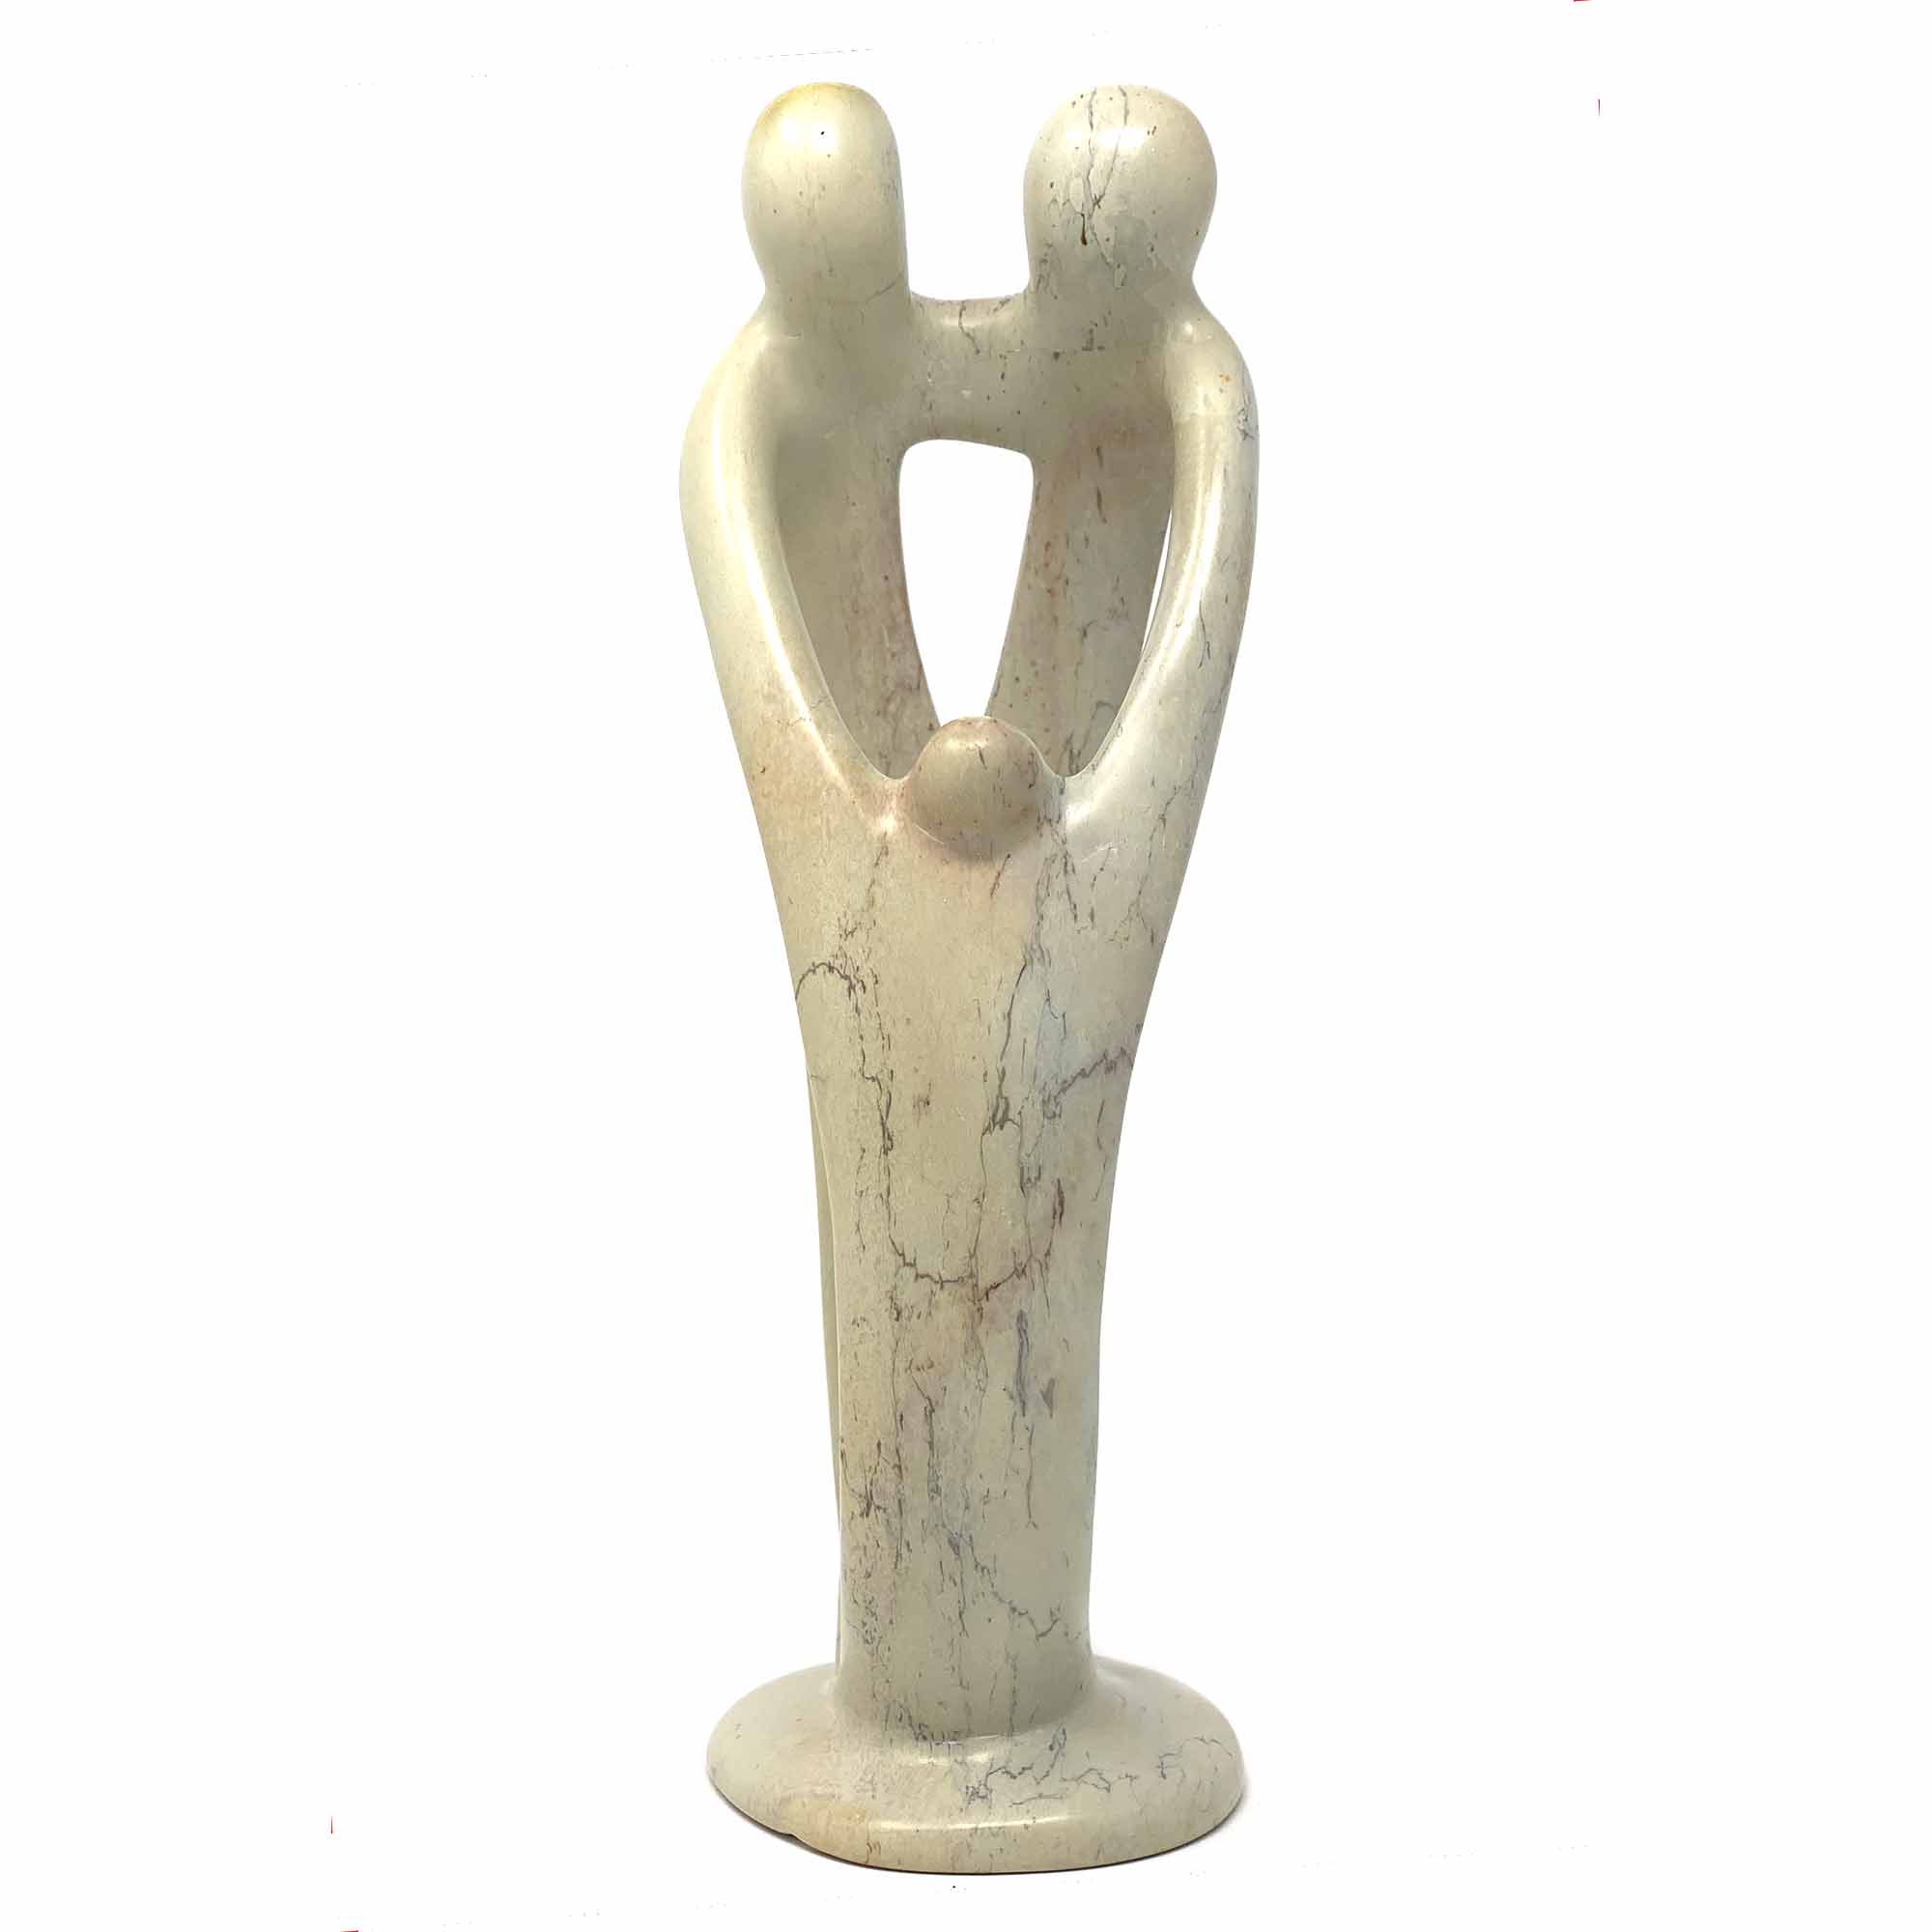 Natural 10-inch Tall Soapstone Family Sculpture - 2 Parents 1 Child